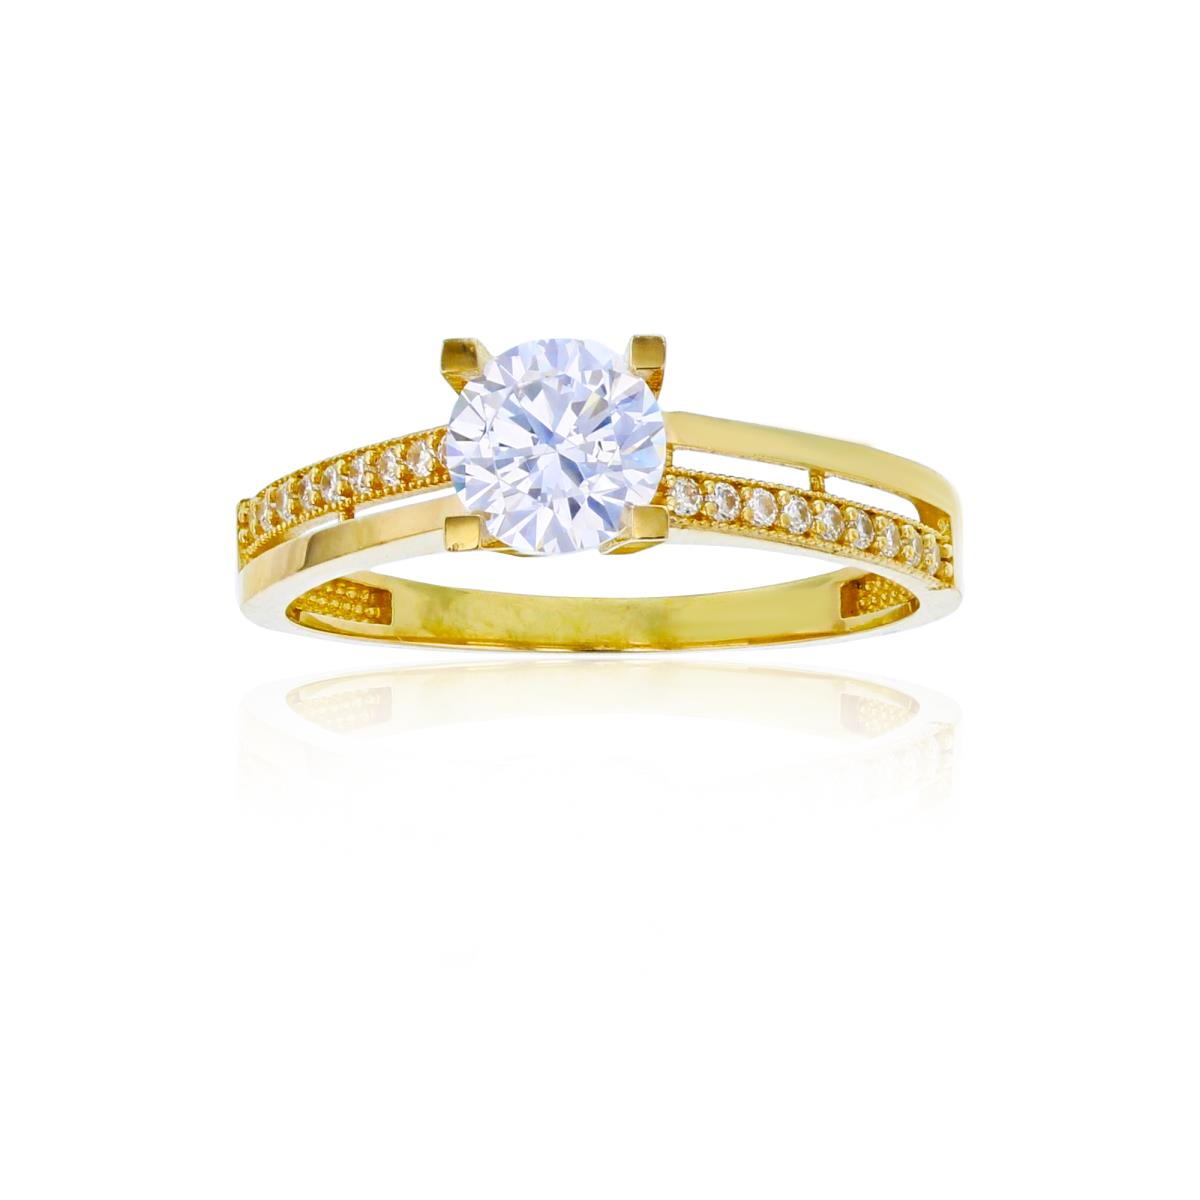 10K Yellow Gold 5.75mm Round Cut CZ 2-Row Pave & HP Sides Engagement Ring